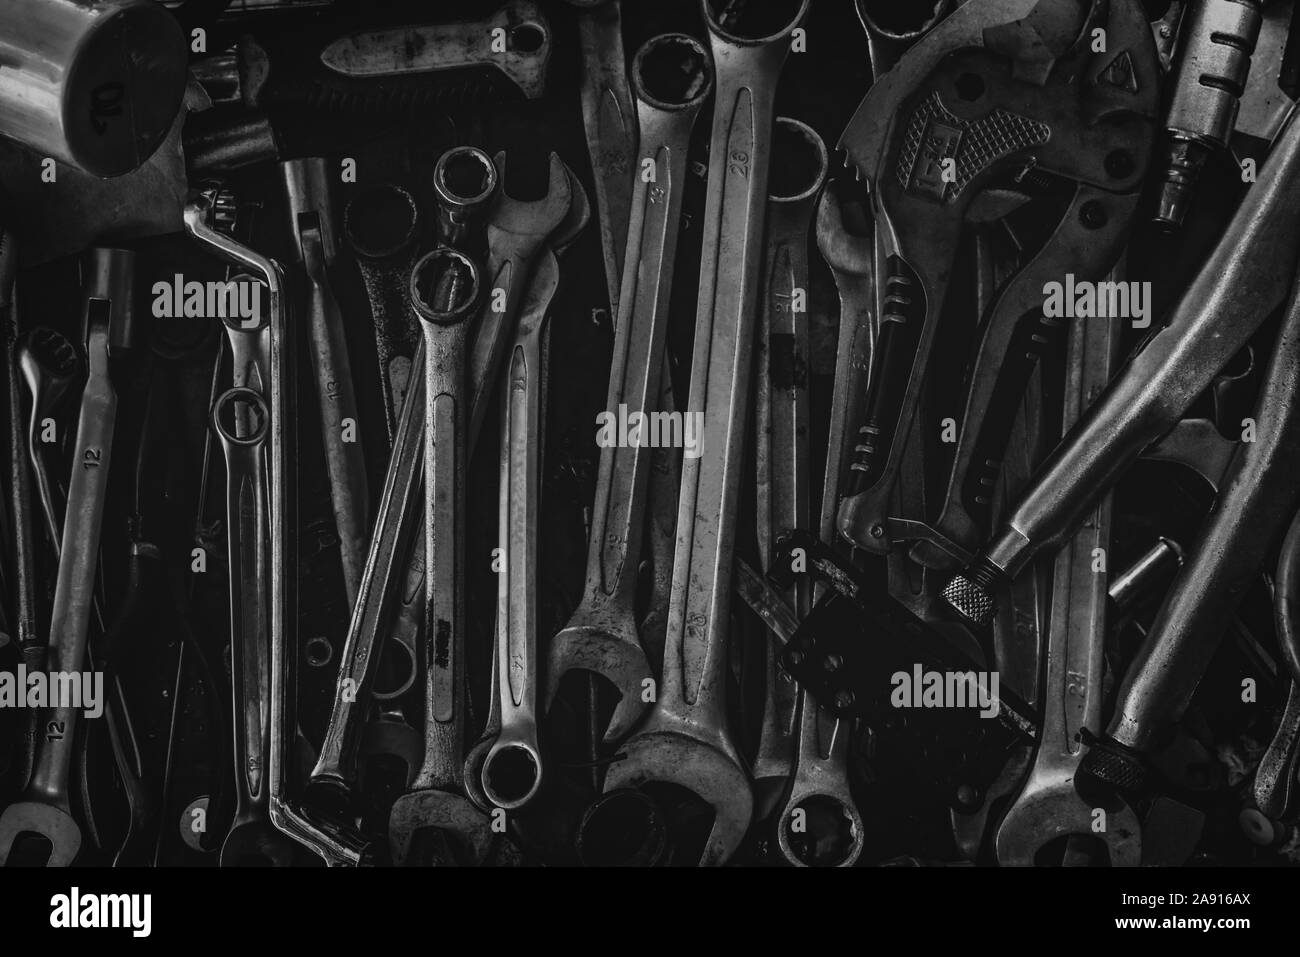 Pile of old wrench. Mechanic tools. Closeup set of spanner in tool box. Chrome wrench at garage workshop. Equipment for repair car or motorcycle. Hard Stock Photo